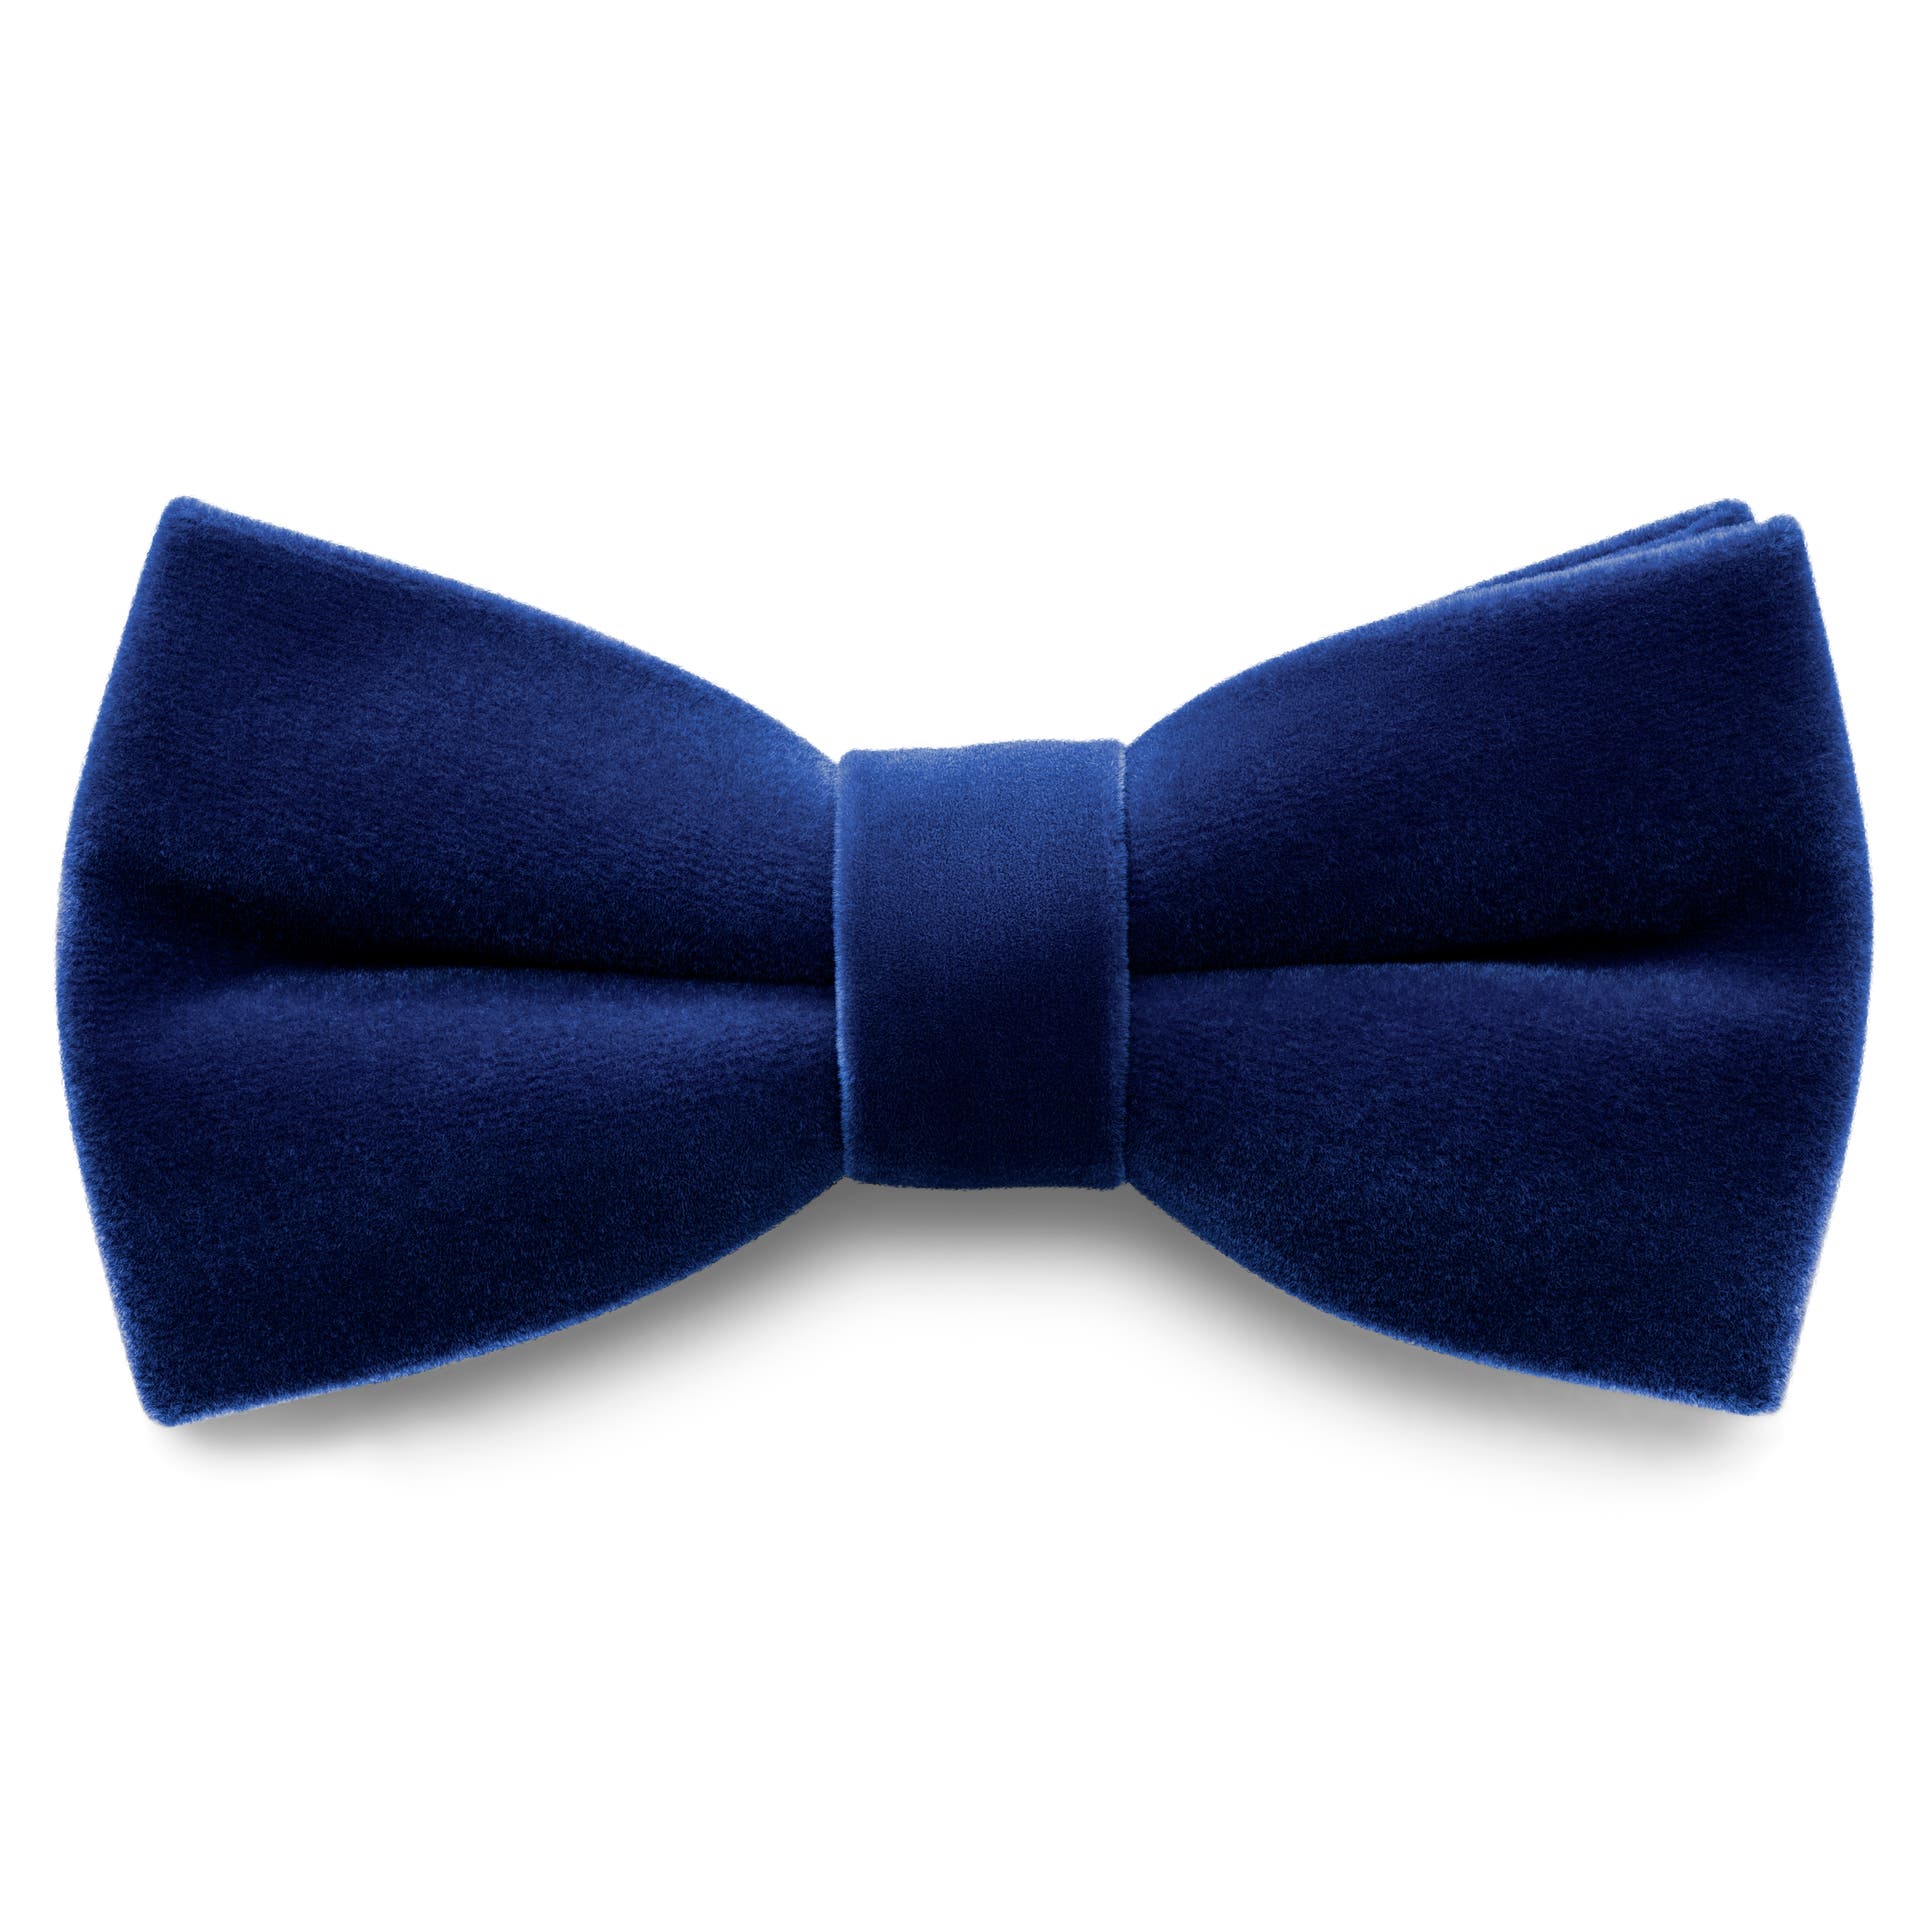 Bow ties | 871 Styles for men in stock | 365-day returns